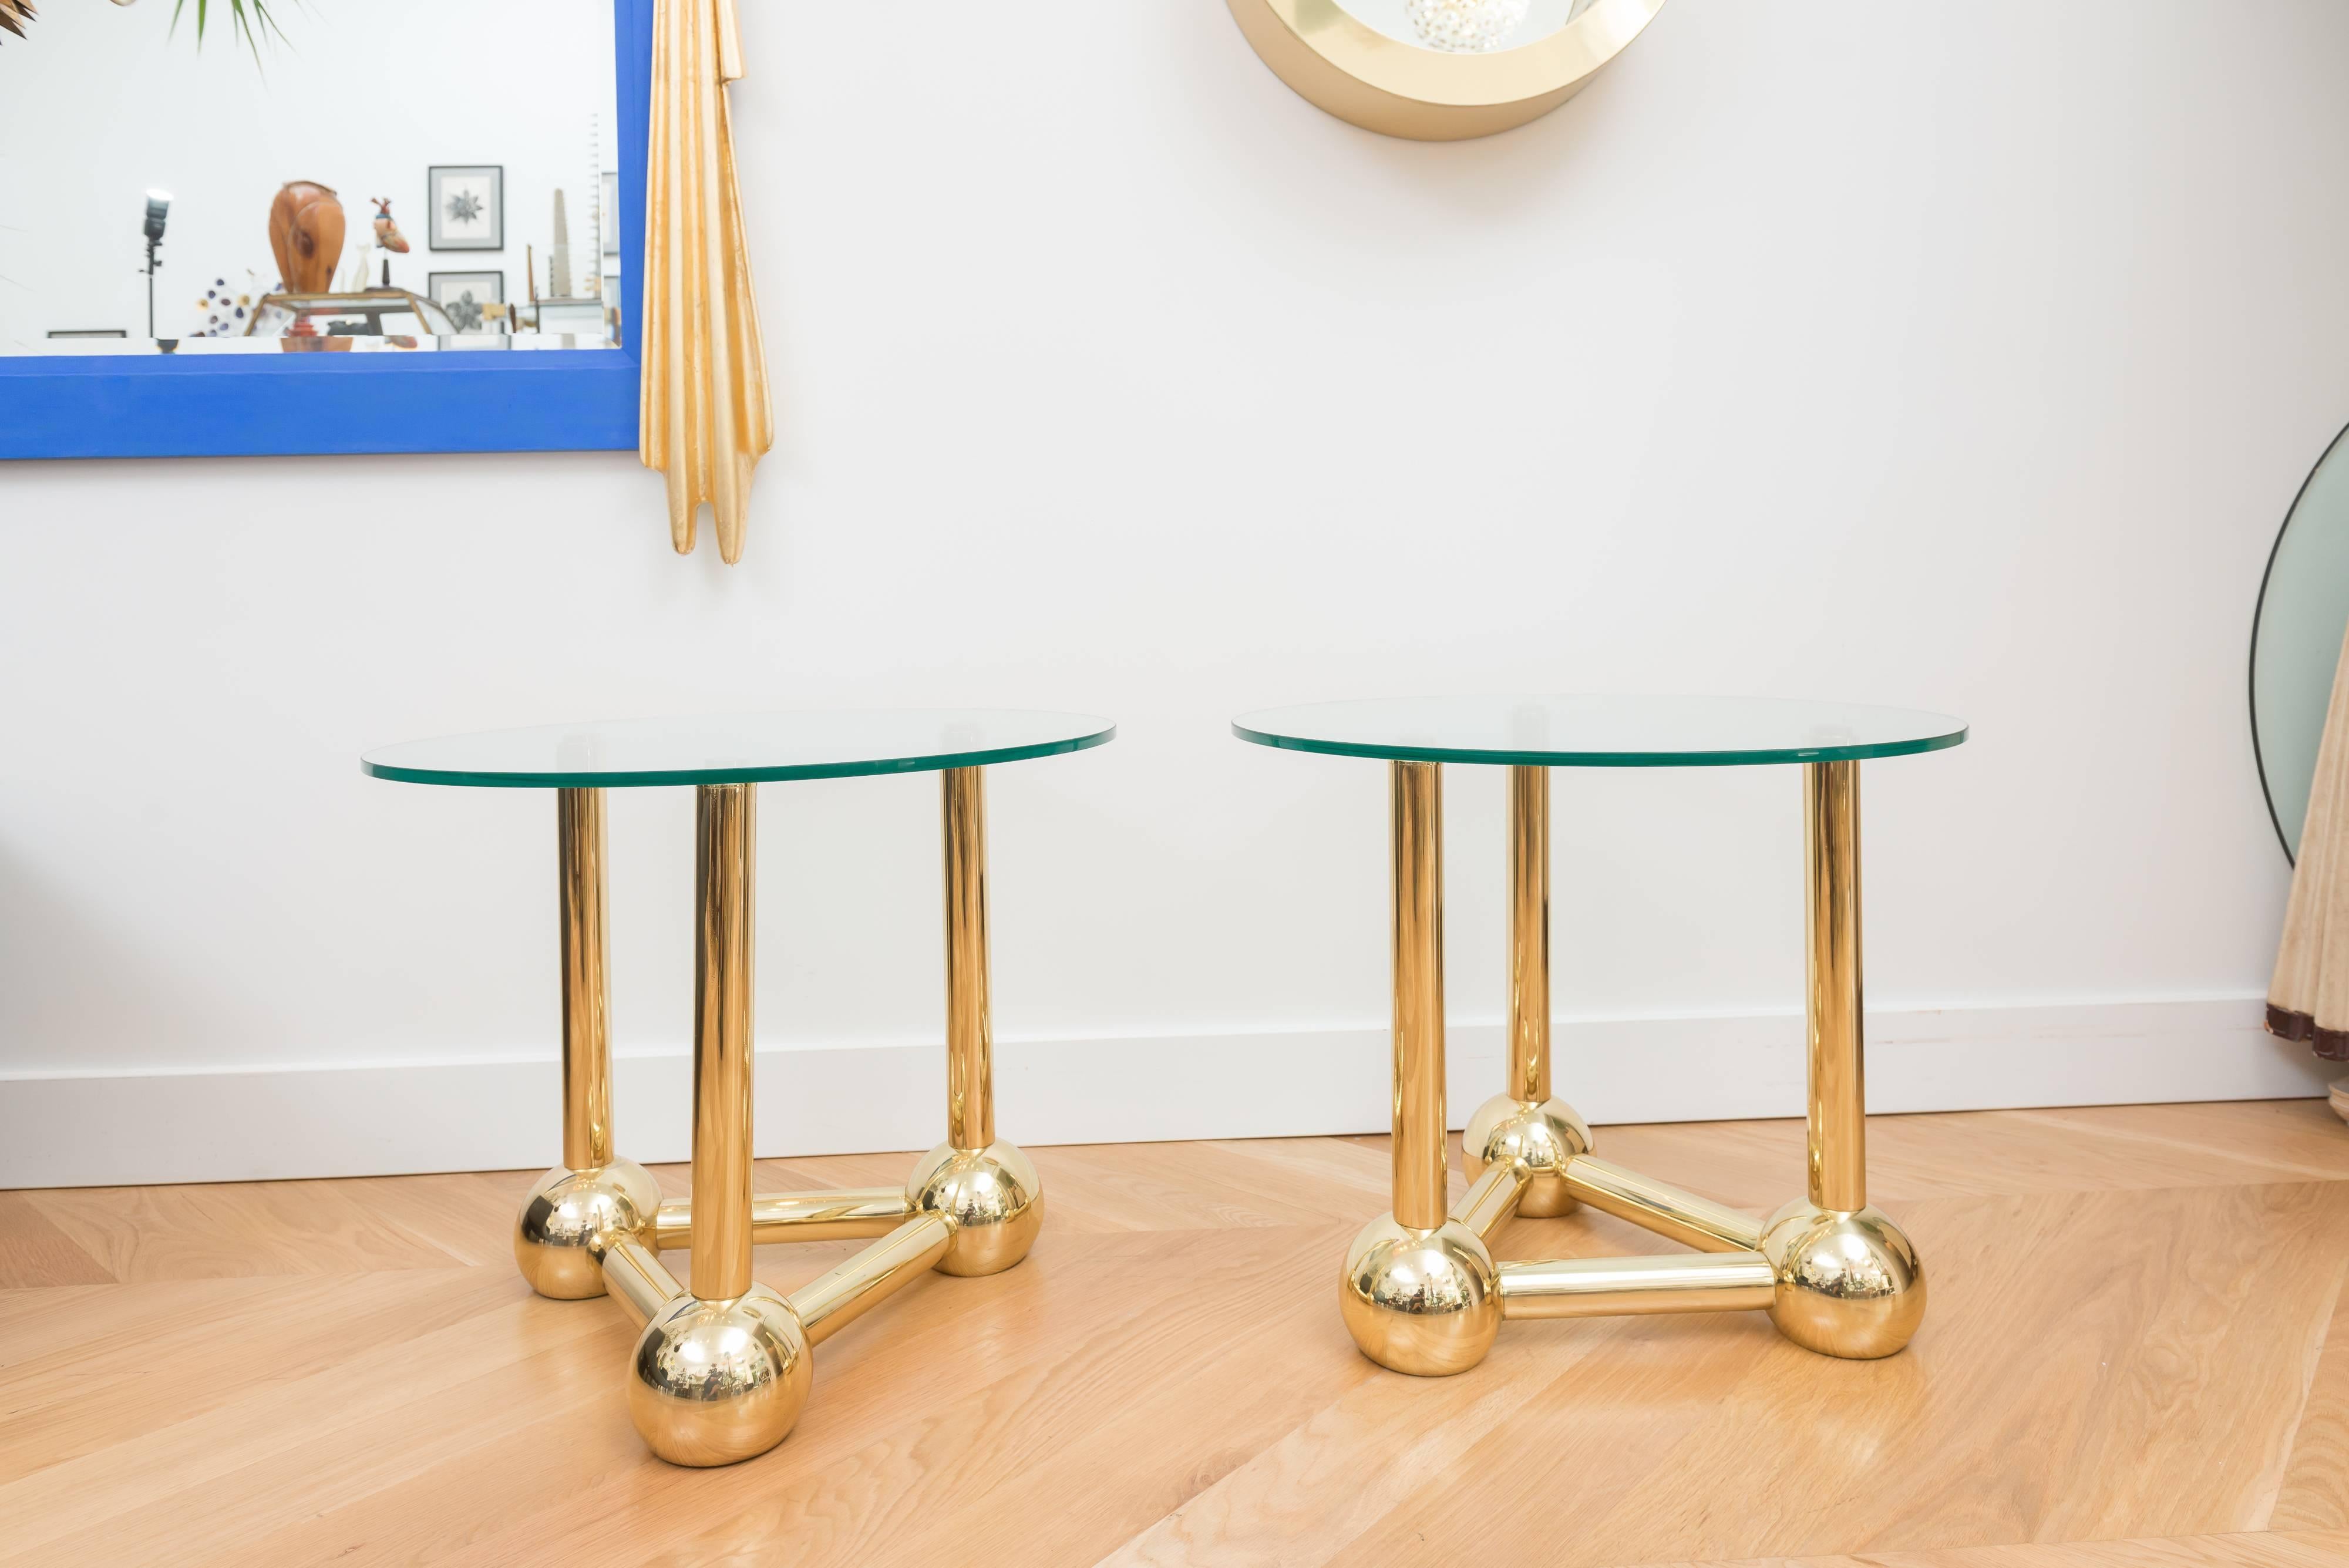 Pair of beautiful brass-plated side tables with glass tops.